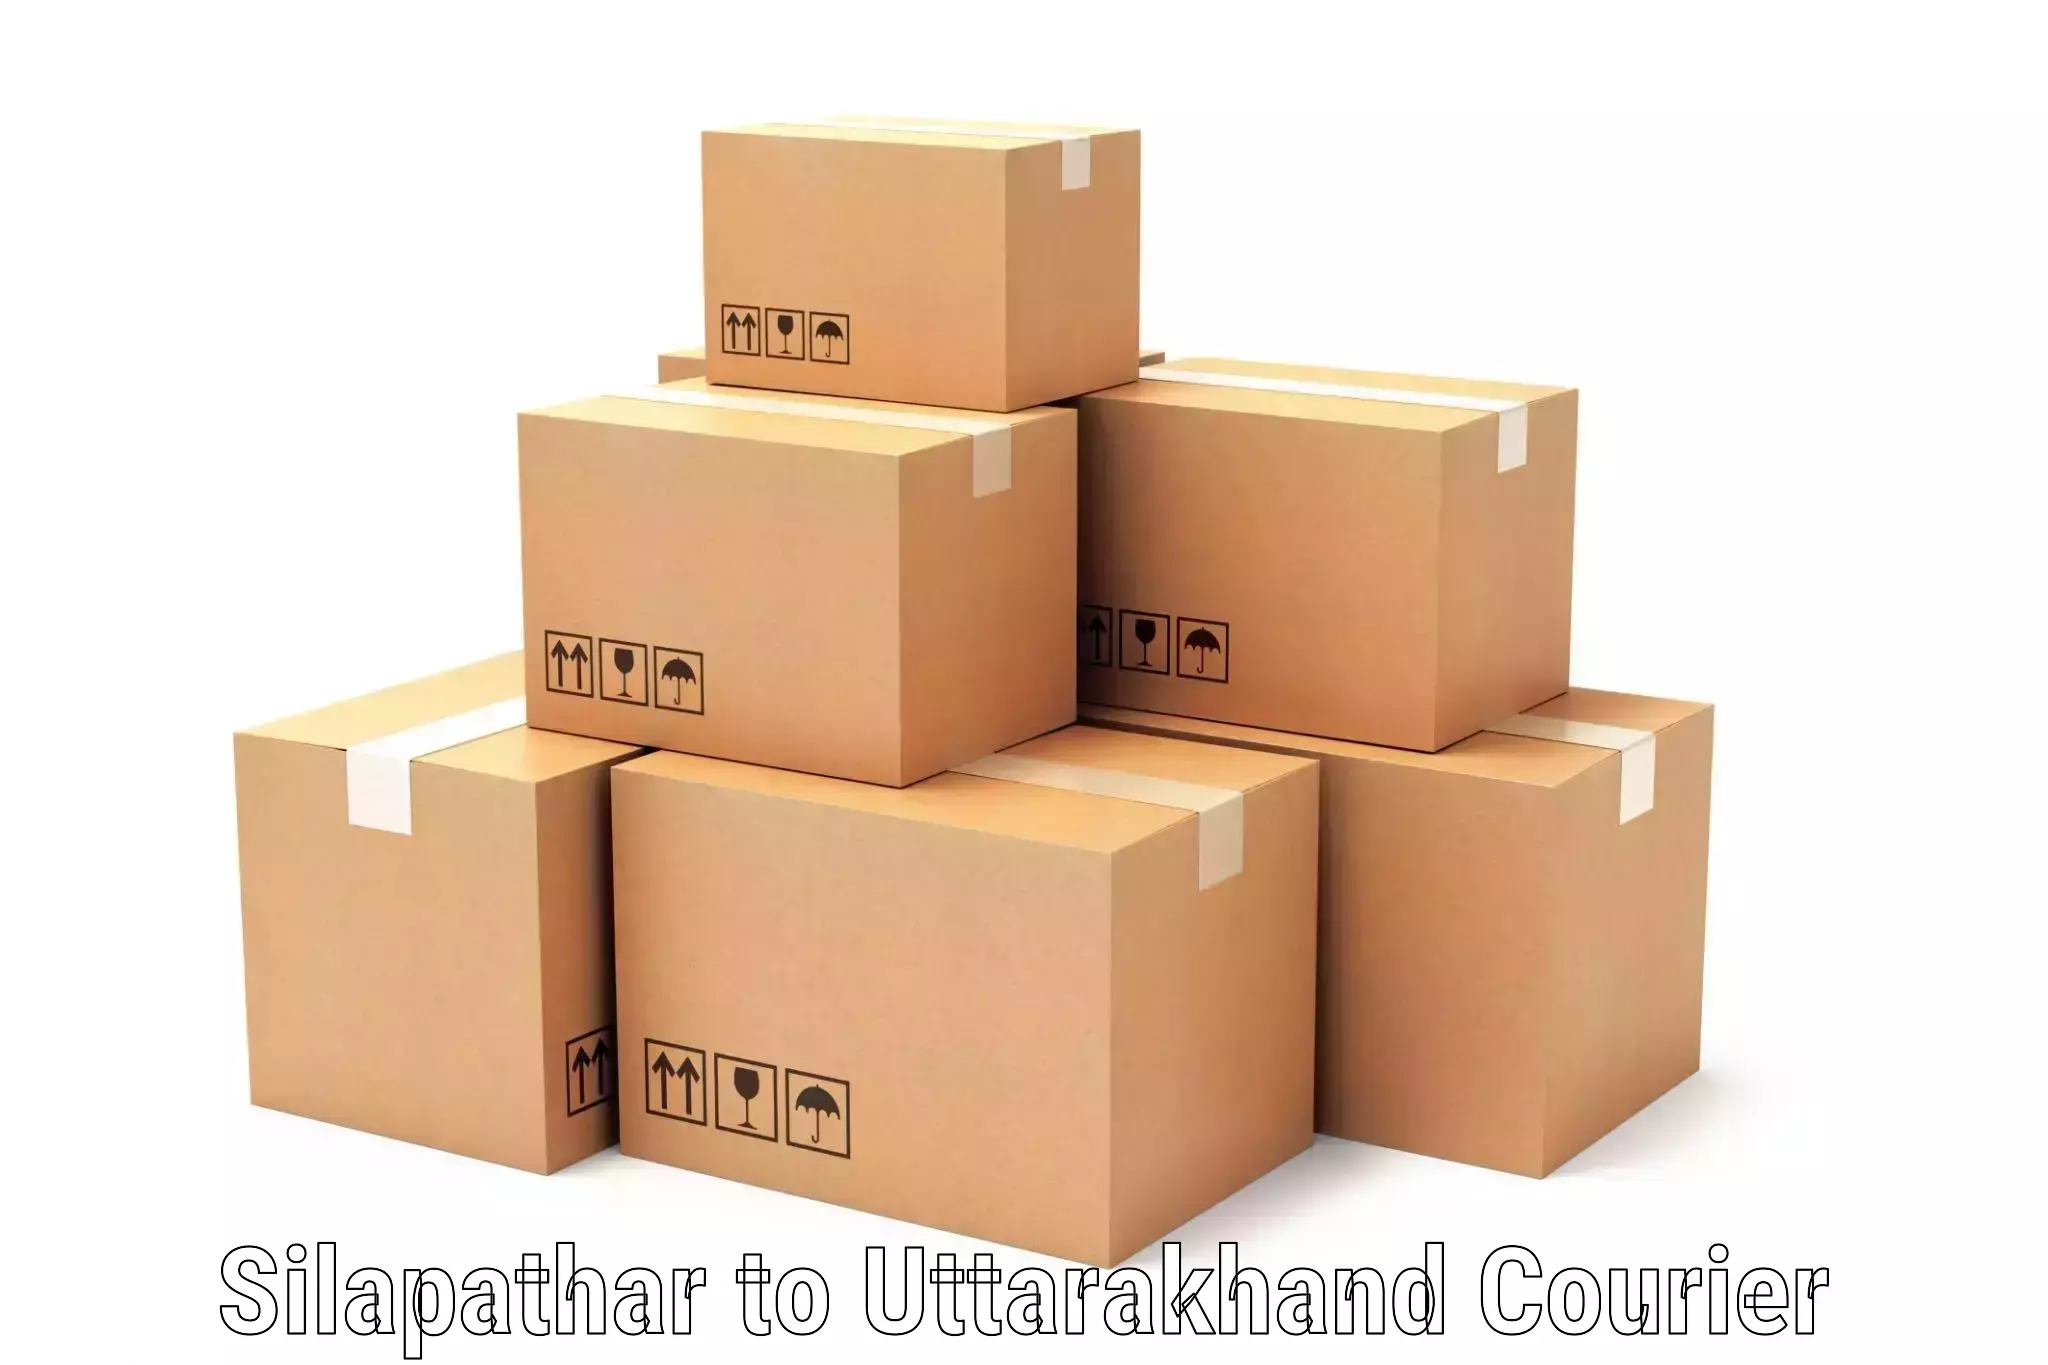 Efficient order fulfillment Silapathar to Roorkee